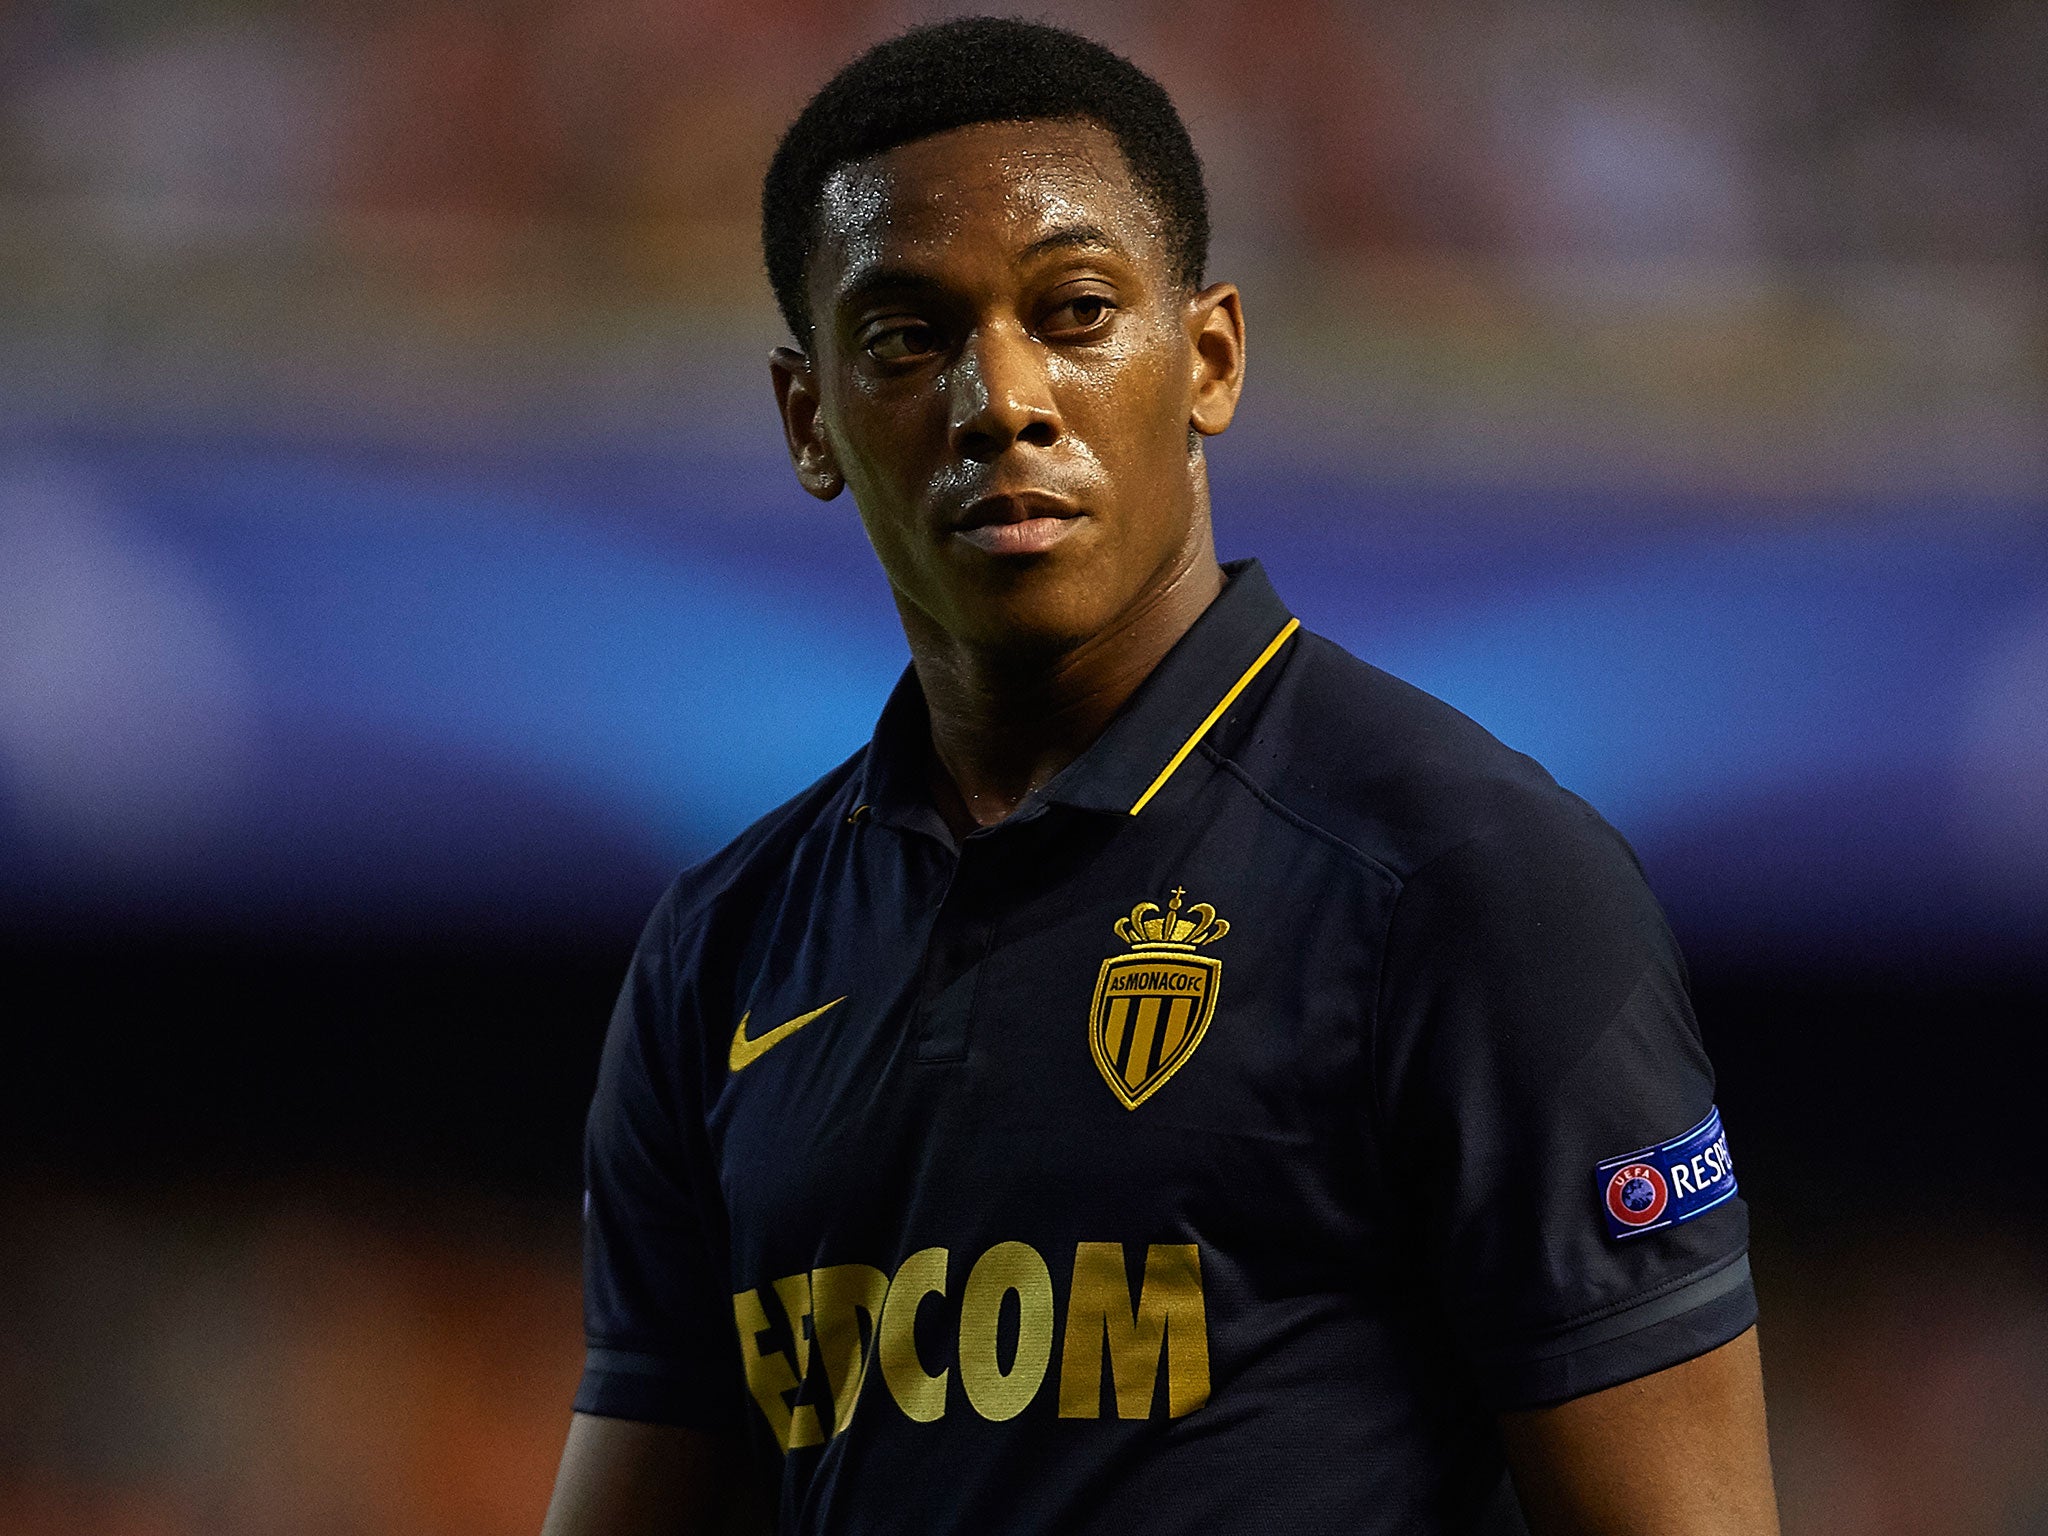 Monaco forward Anthony Martial is on the verge of joining Manchester United